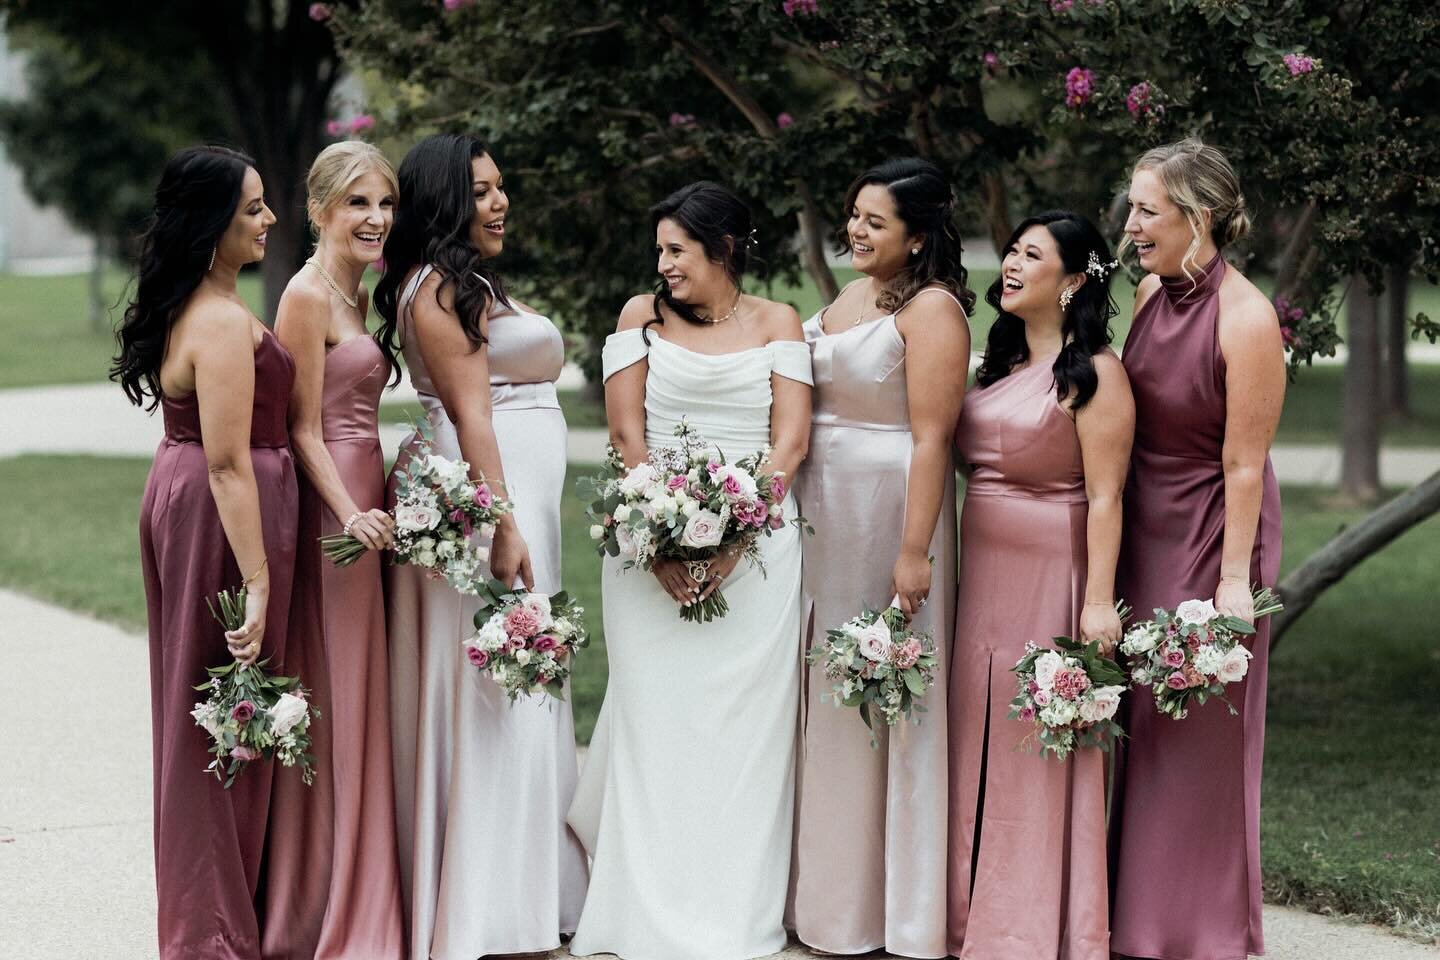 Blushing bridesmaids and our blissful bride✨ 

Photography @nacphotograph 
Design @alloreevents 
Florals @petalnbloom.studio 
Bridal Dress @annebarge 
Bridesmaids&rsquo; Dresses @jennyyoonyc 

#weddings #dcweddings #weddingplanner #brideandbridesmaid